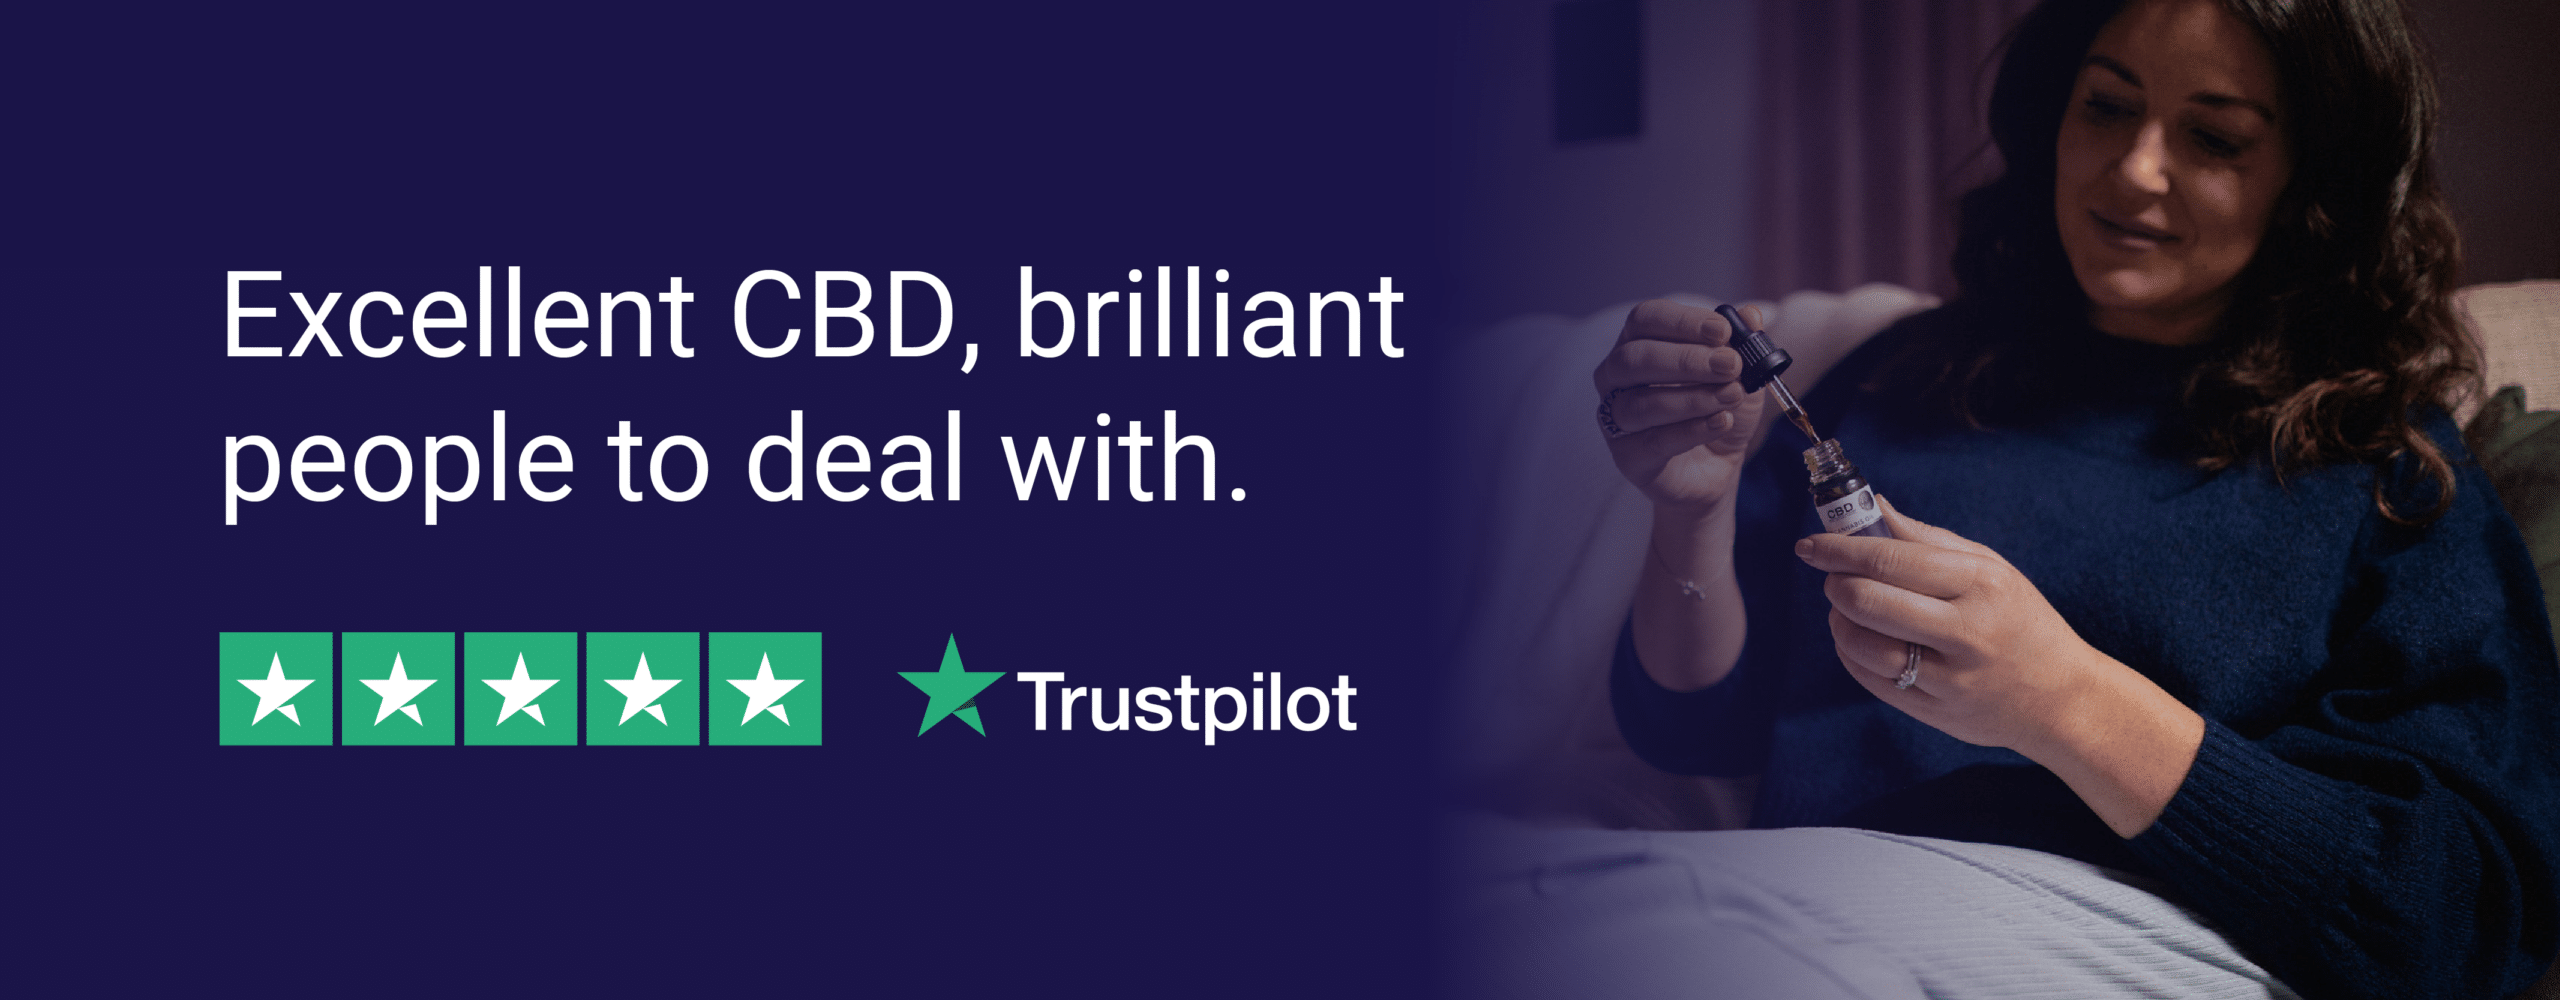 "Best CBD, brilliant people to deal with." 5 star Trustpilot review.